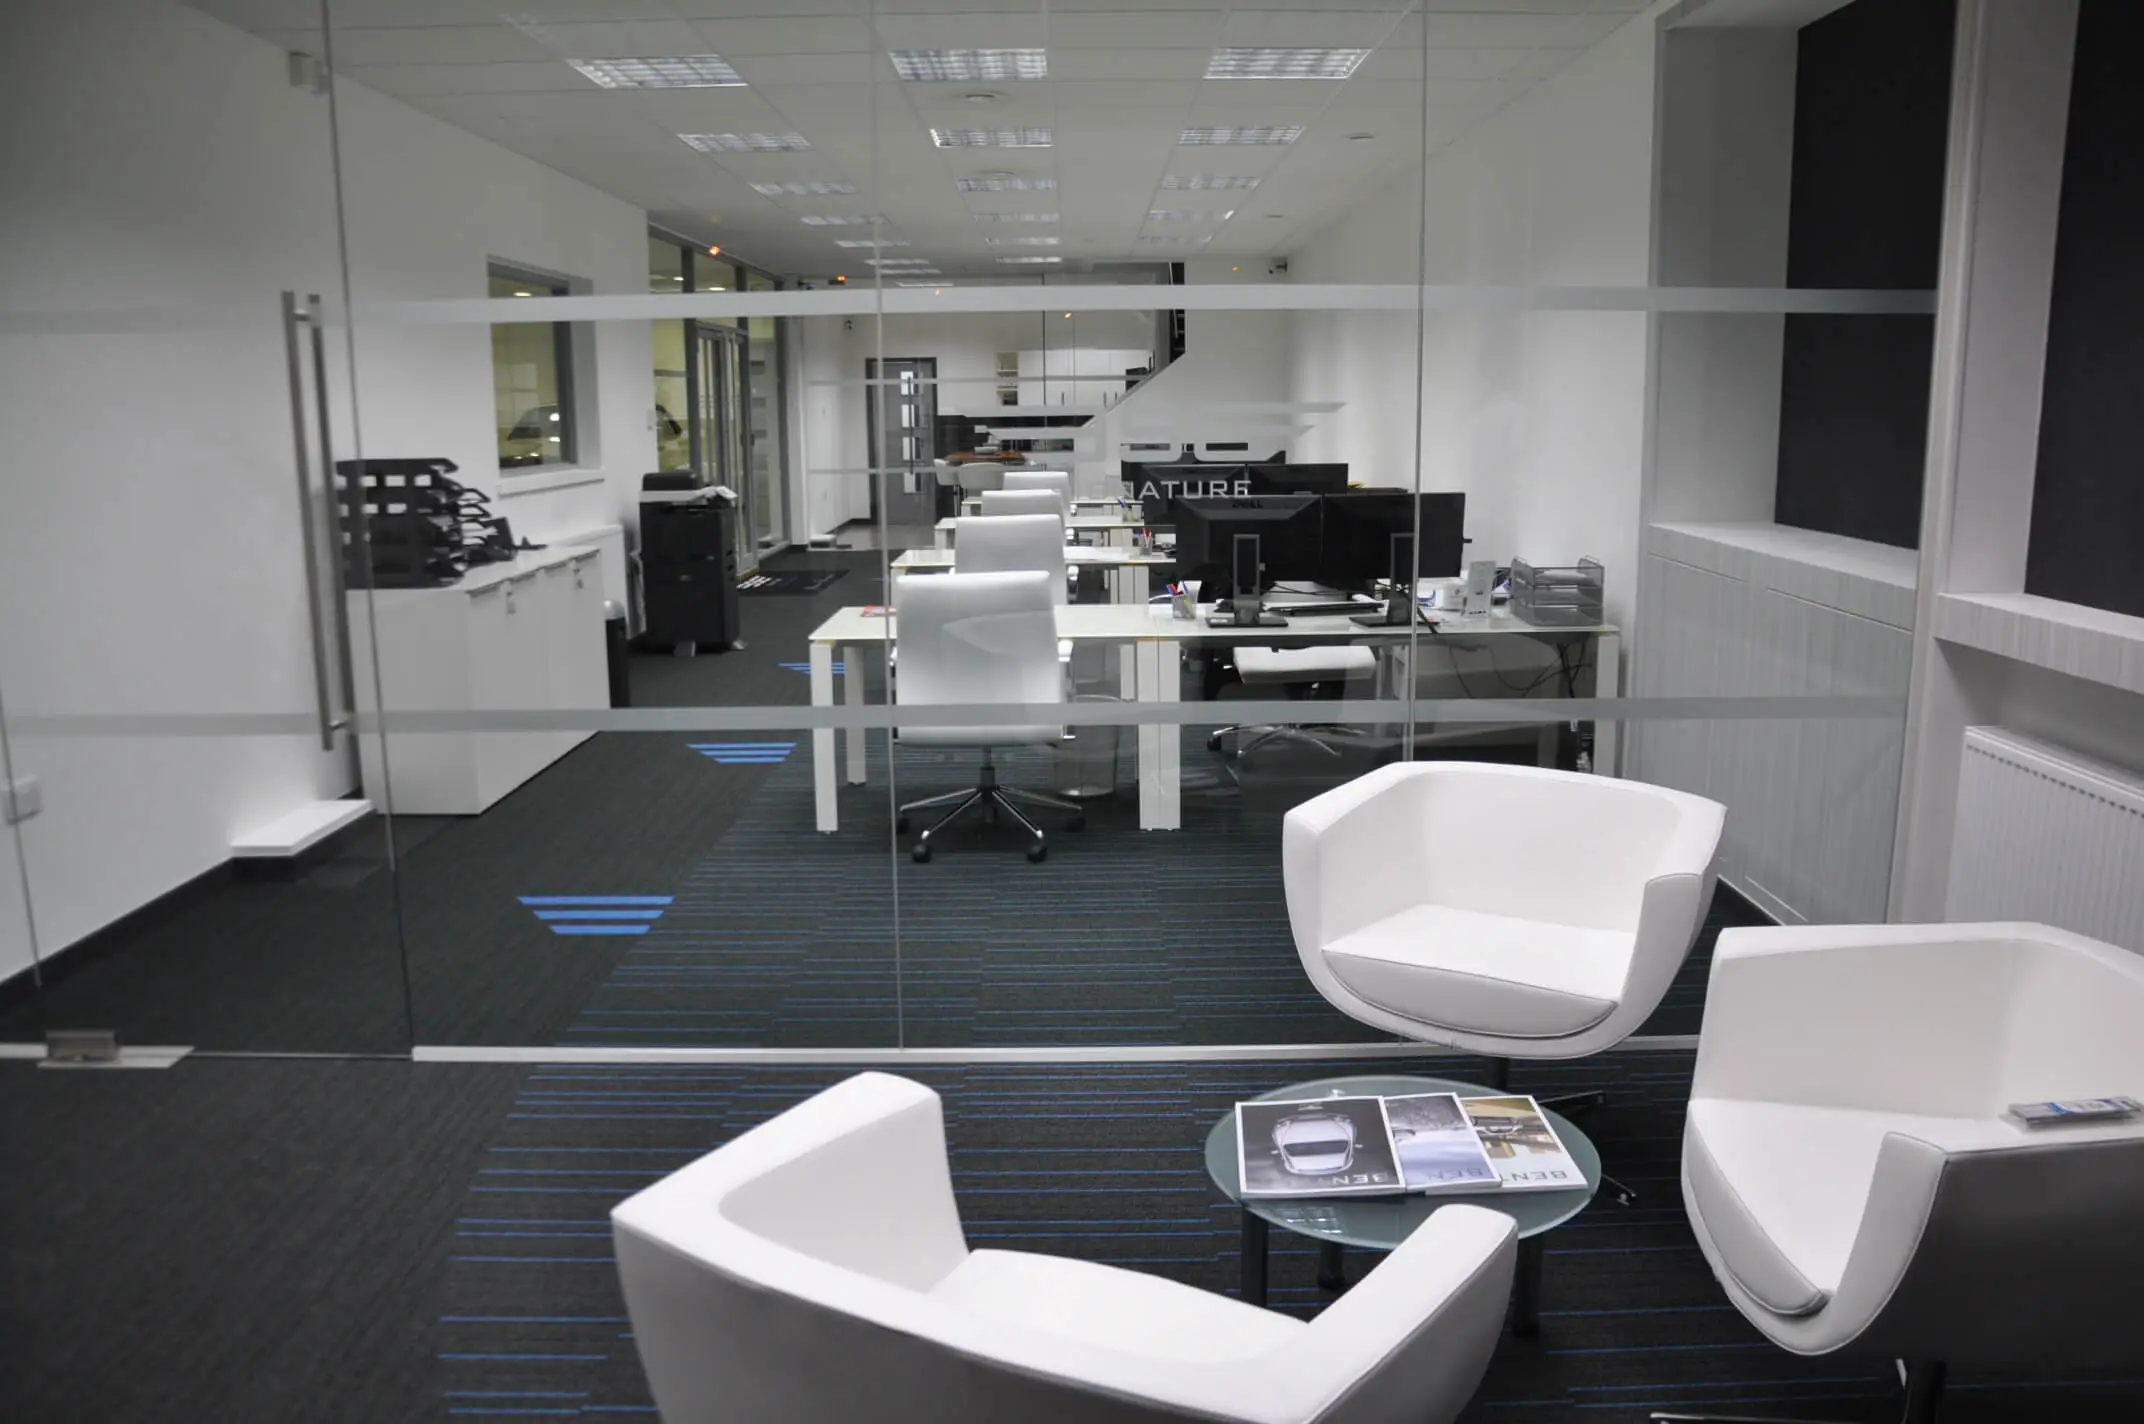 Offices work and breakout area spaces divided with glass partitions